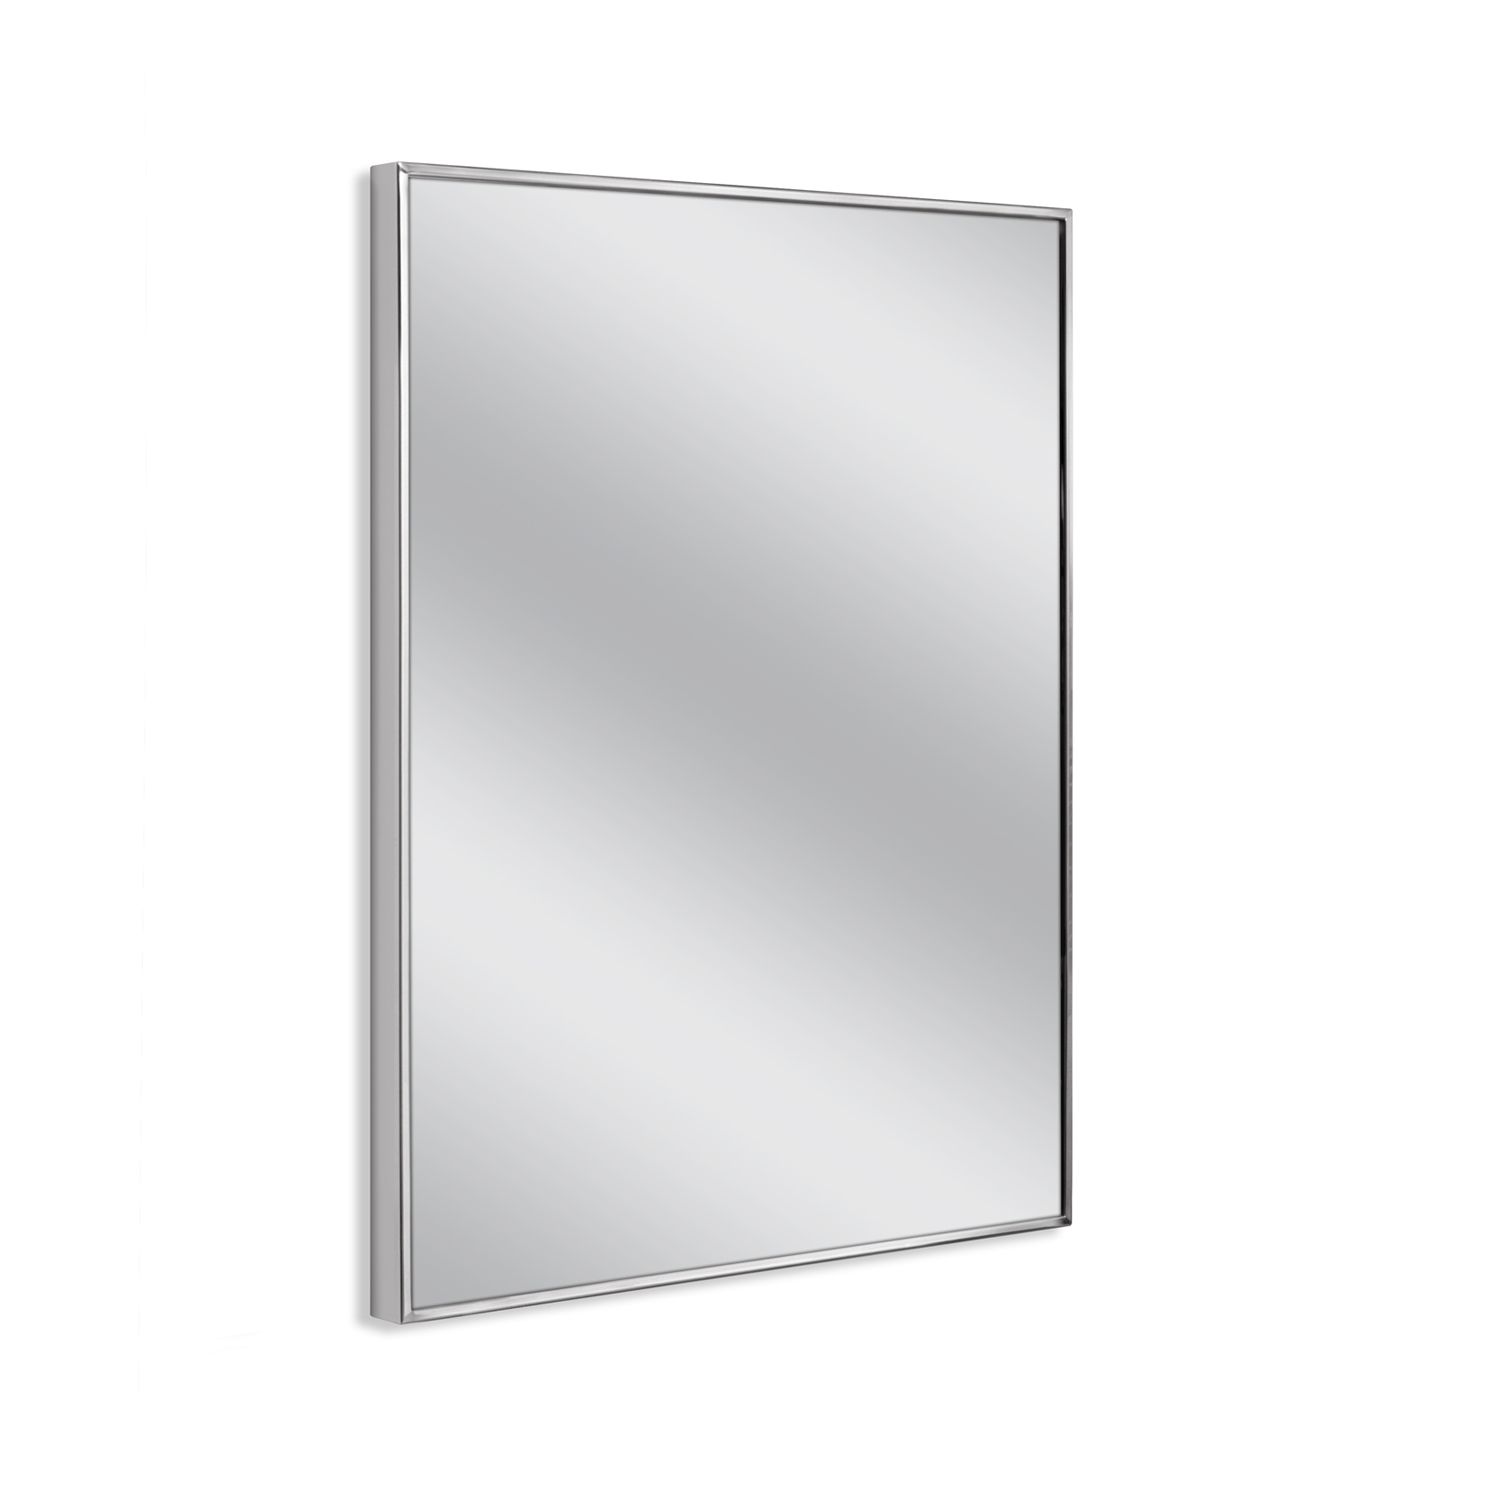 Image for Head West Spectrum Chrome Wall Mirror at Kohl's.